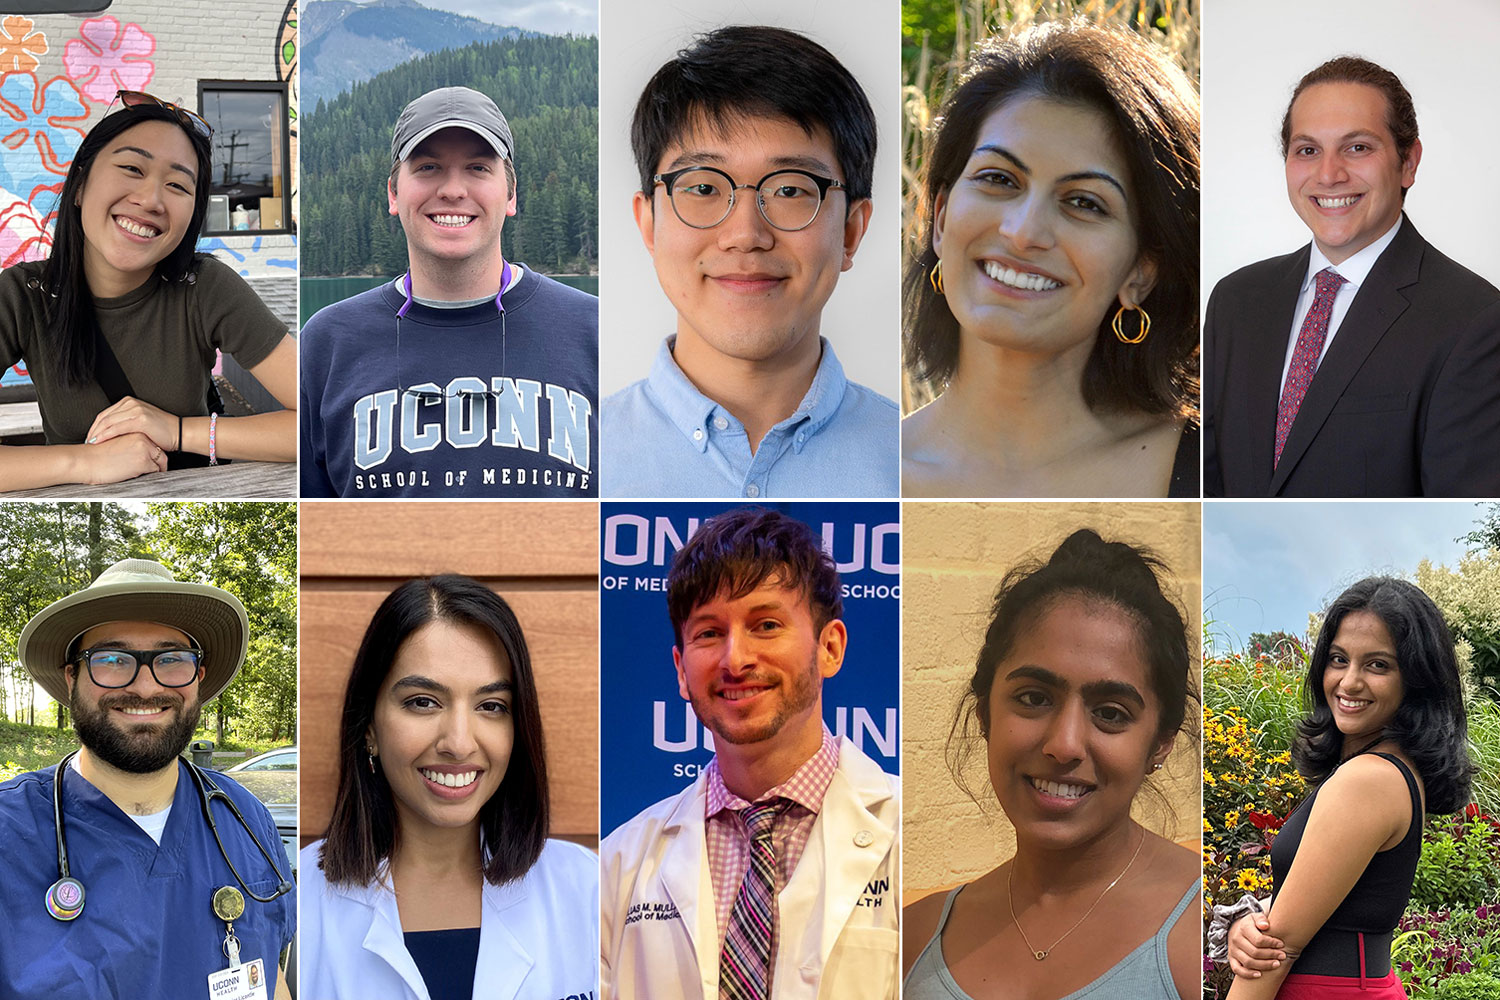 collage of medical student portraits